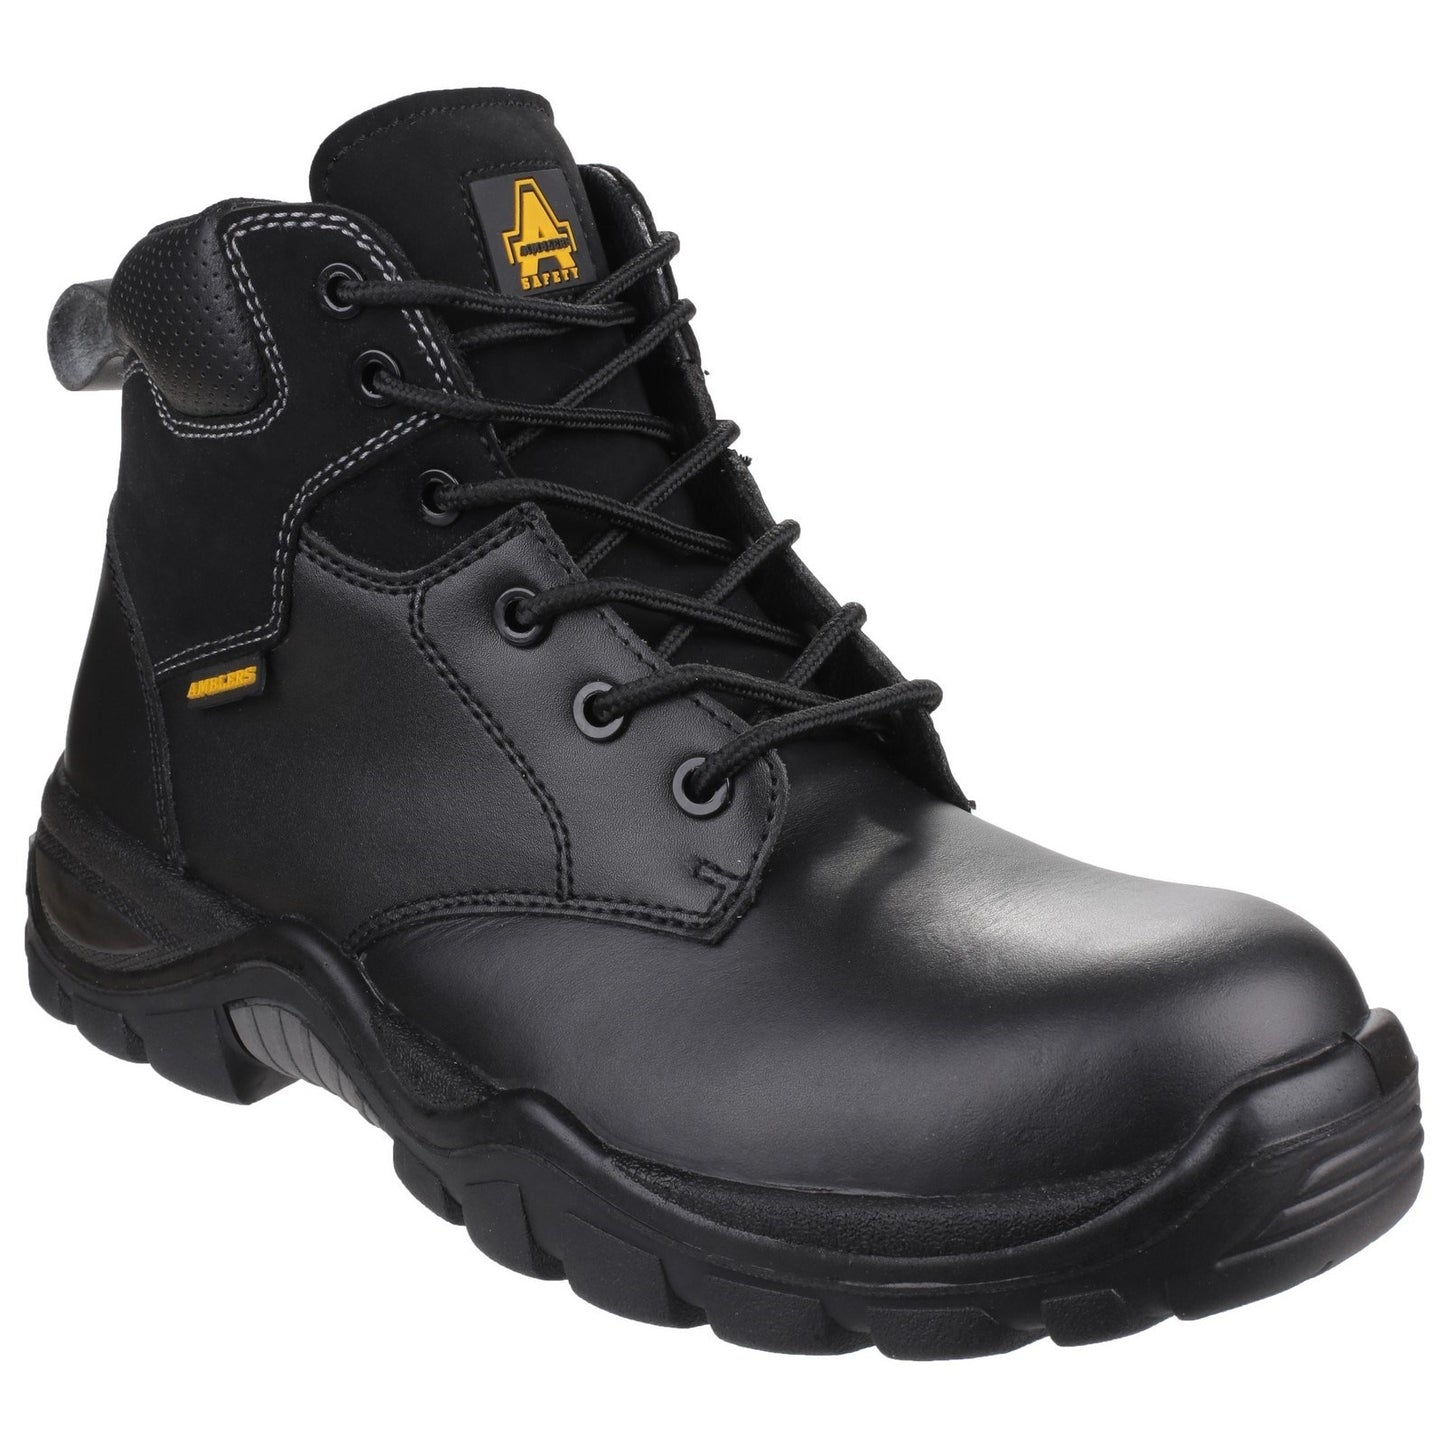 AS302C Preseli Non-Metal Lace up Safety Boot, Amblers Safety